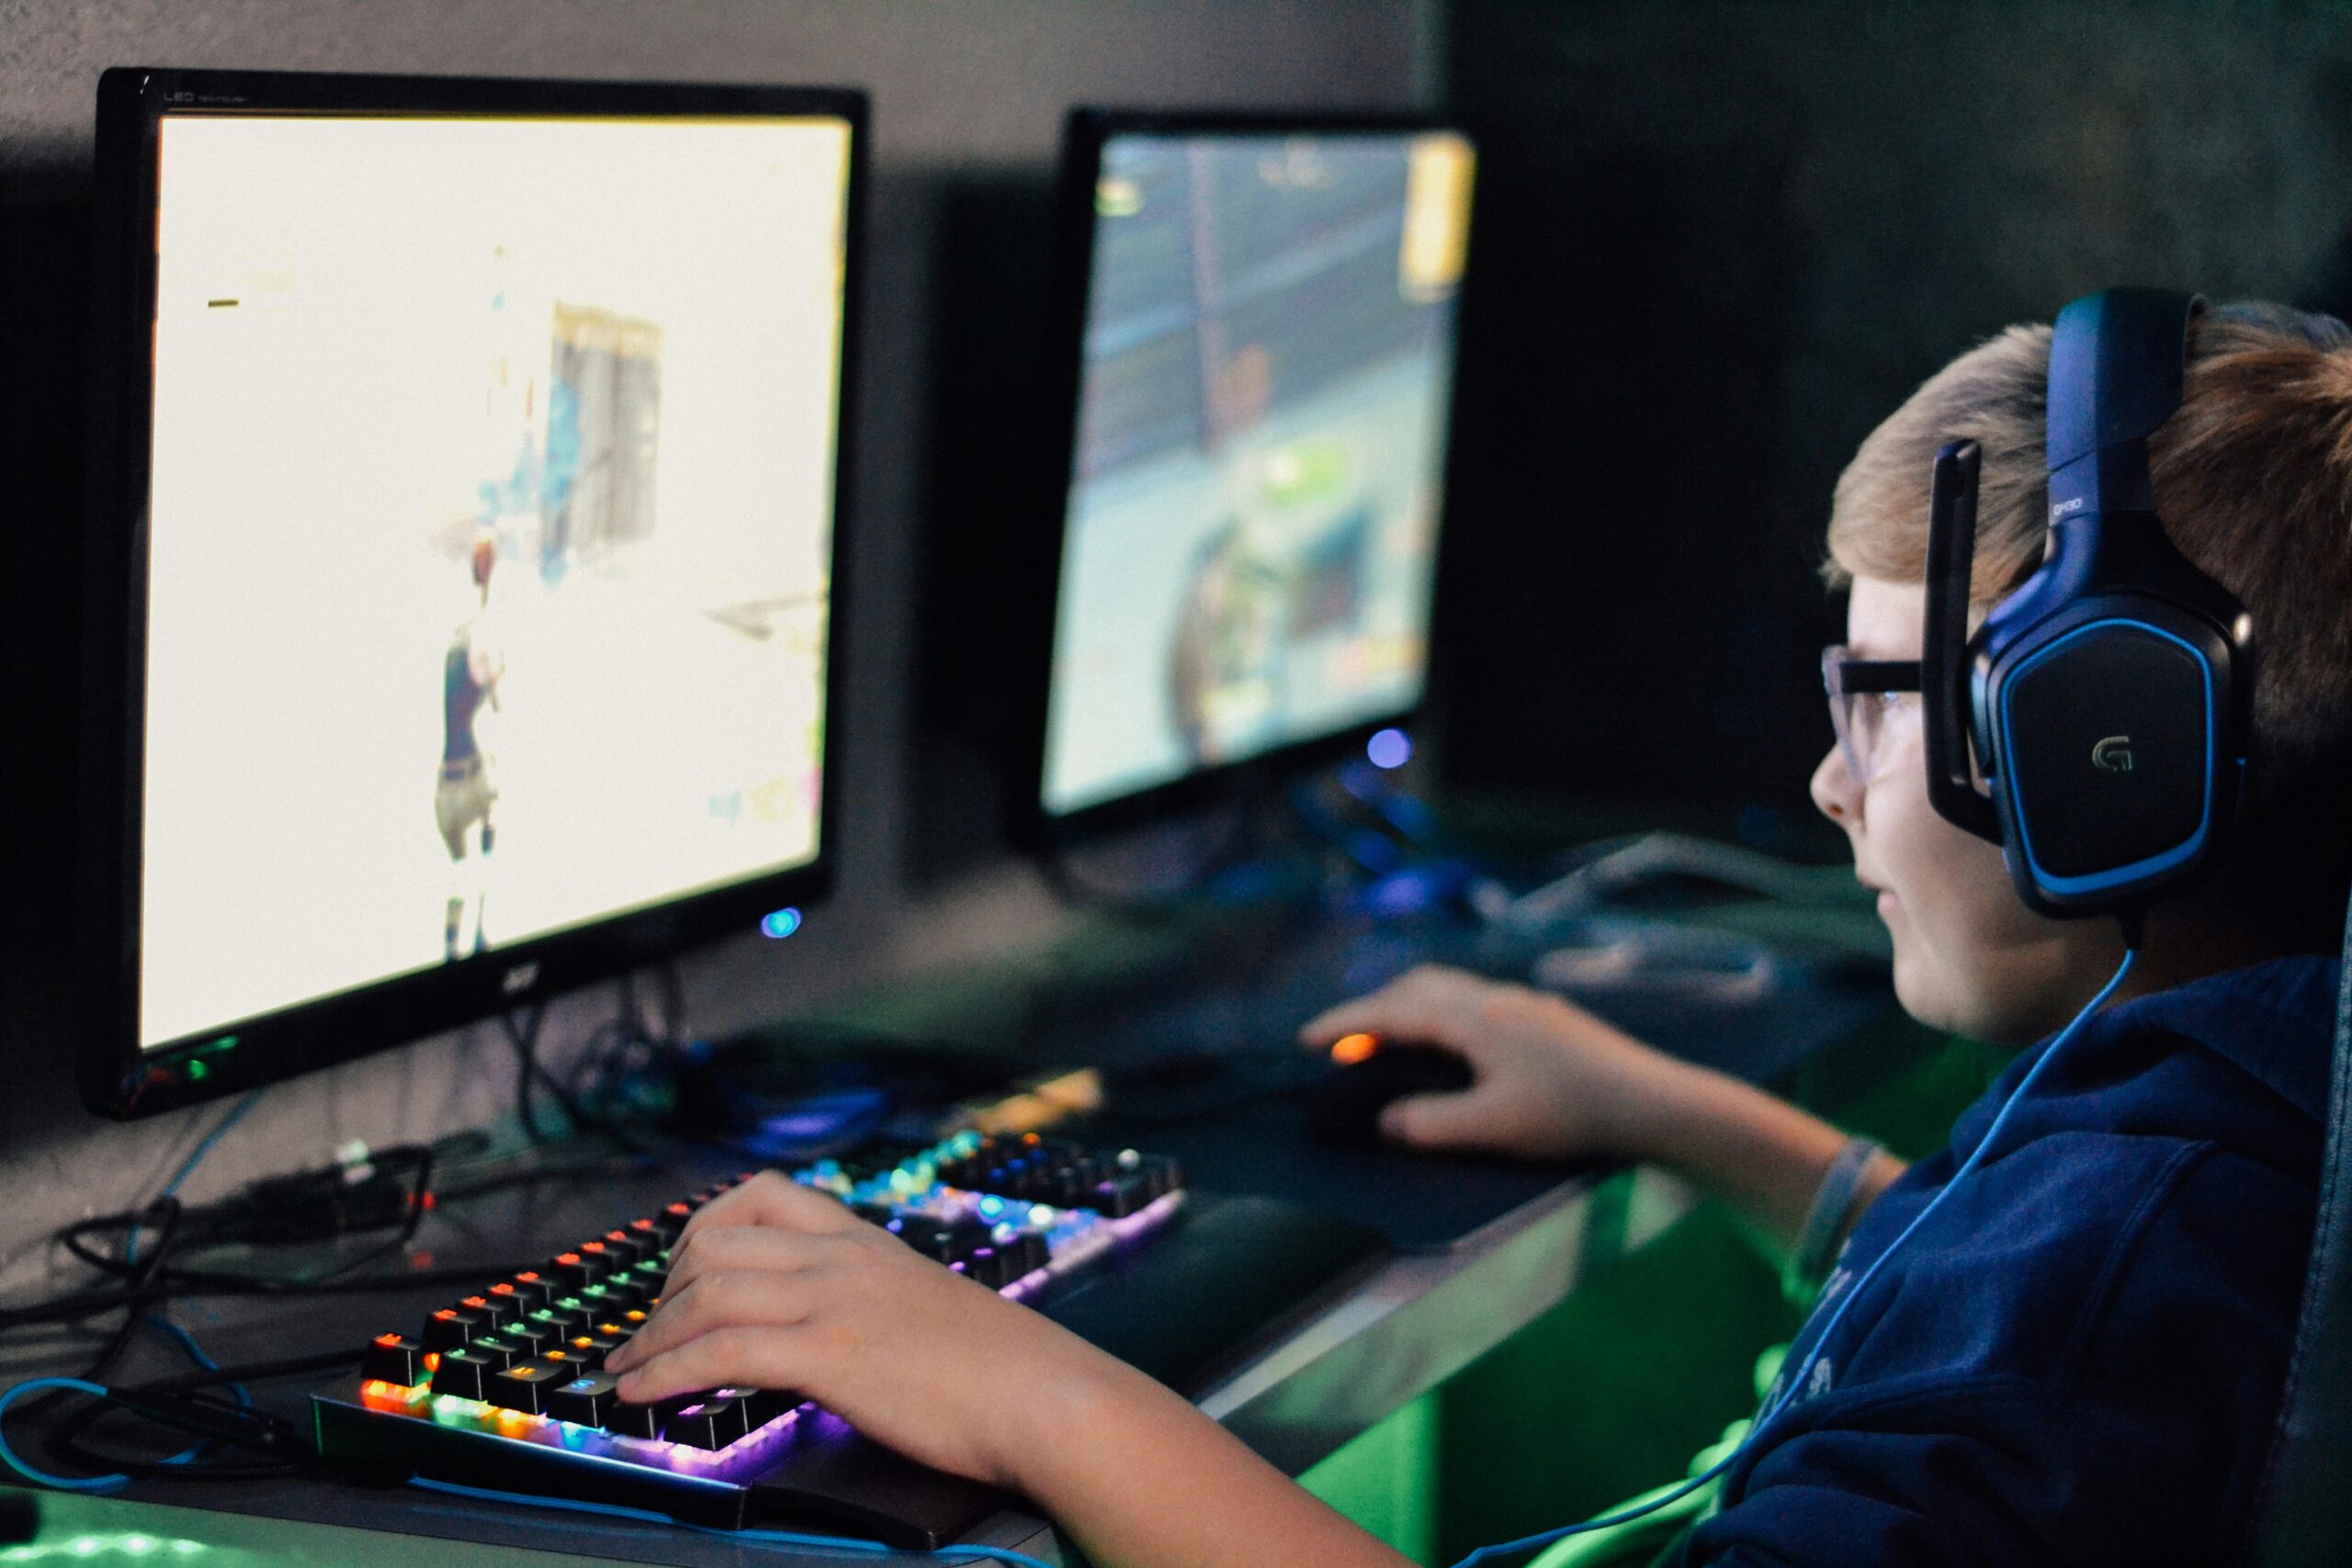 Prepping For A Year Of Gaming? Tips For Keeping Your Eyes Safe